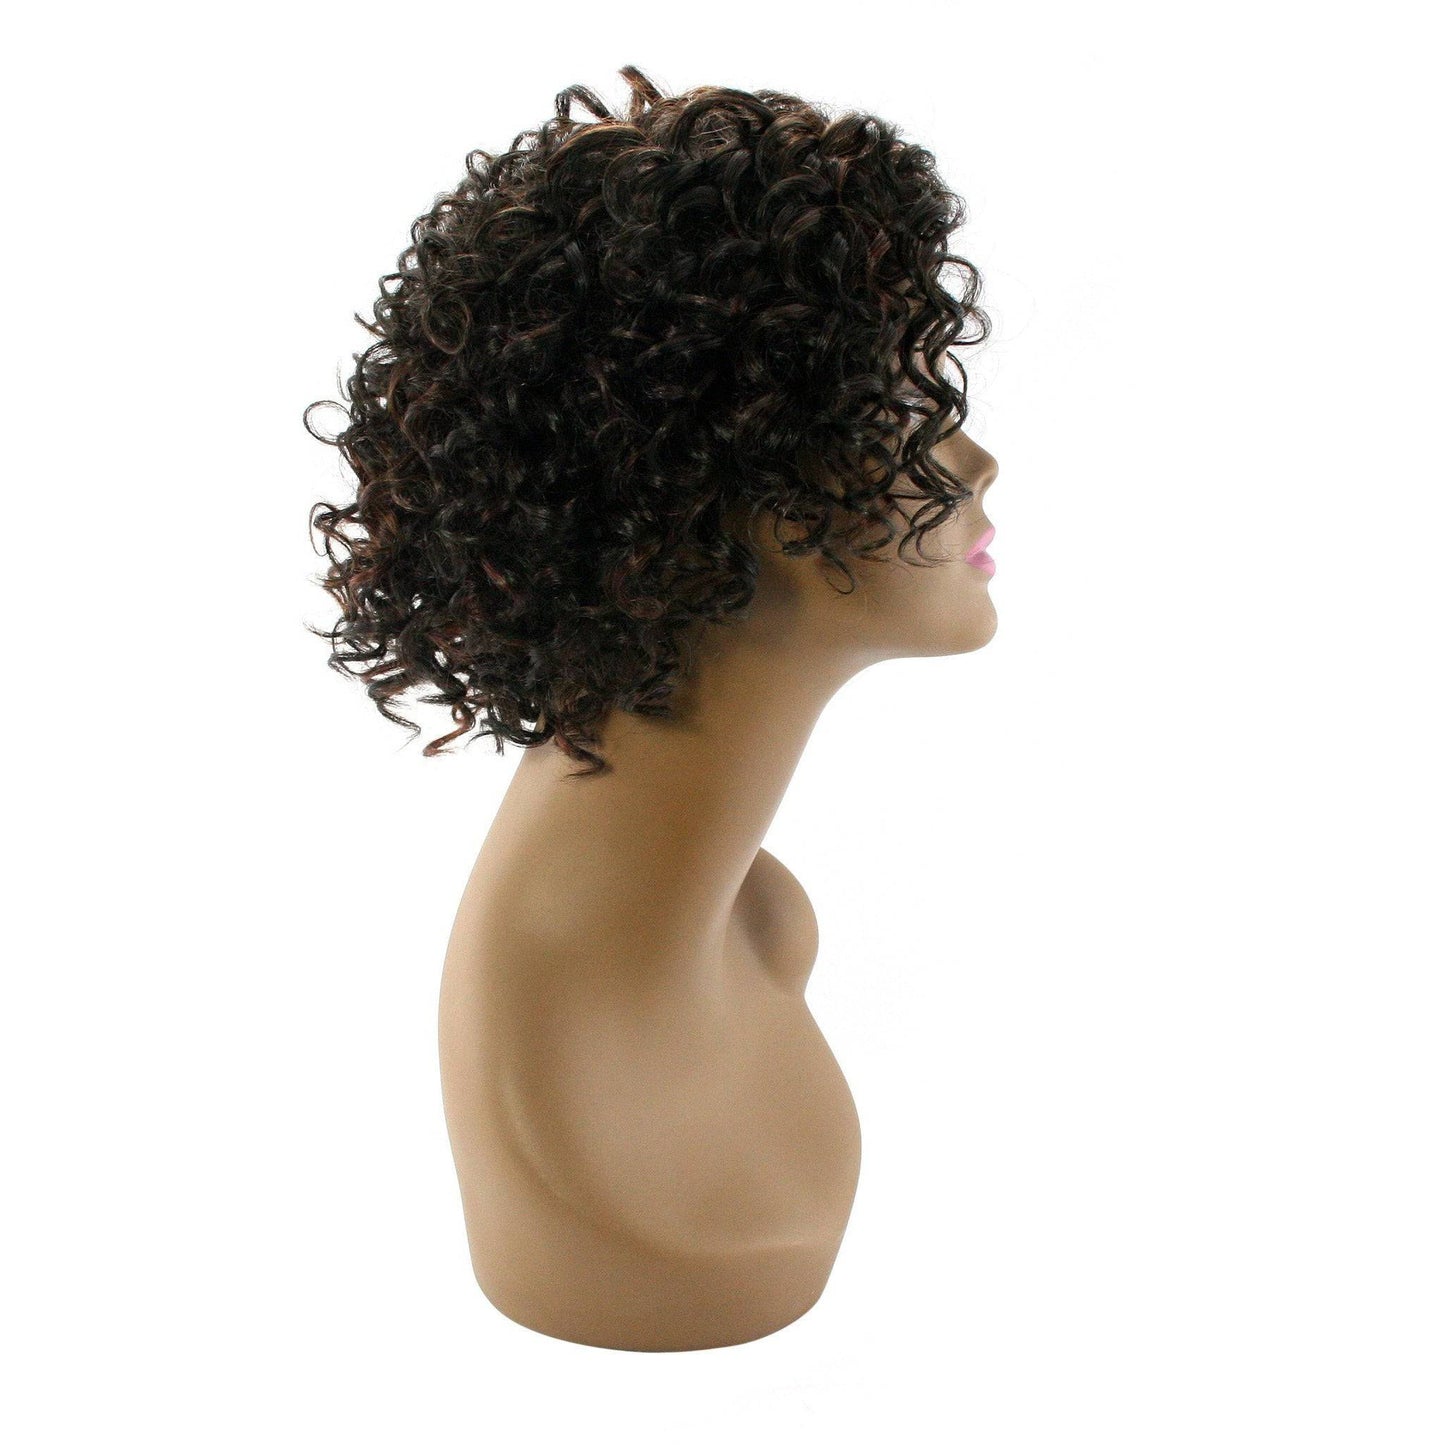 Unique's 100% Human Hair Full Wig / Style "A7" - VIP Extensions